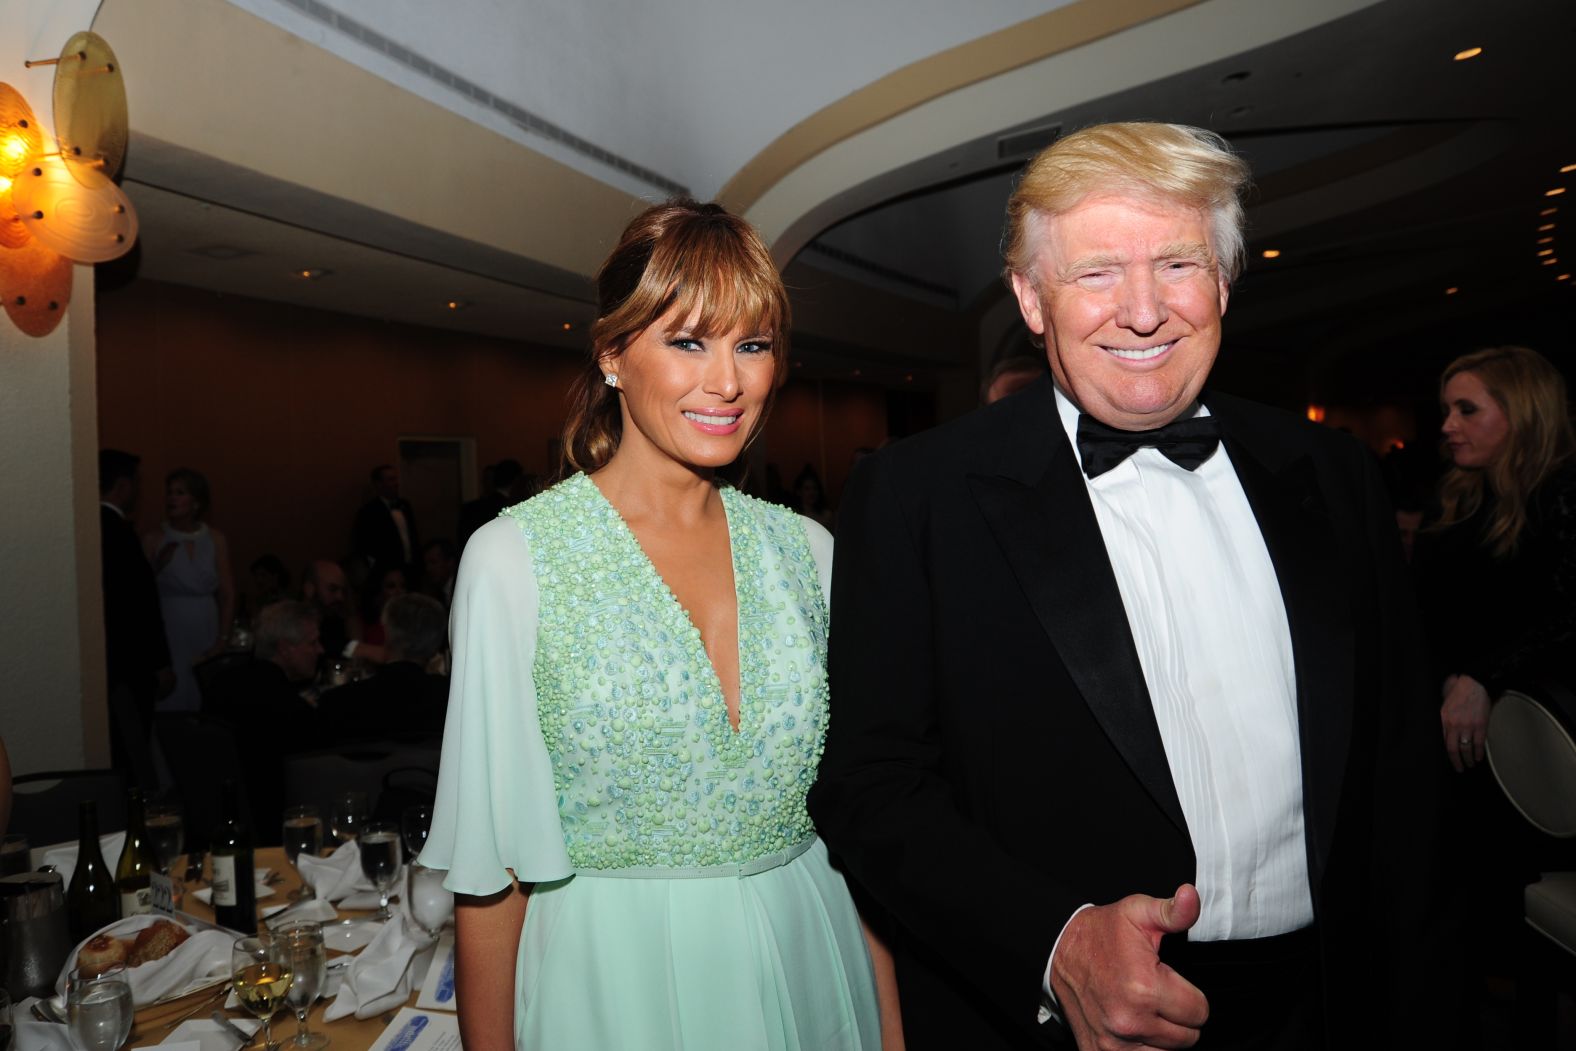 Donald Trump and his wife, Melania, attend the correspondents' dinner in 2015. They didn't attend any of the dinners while he was president.